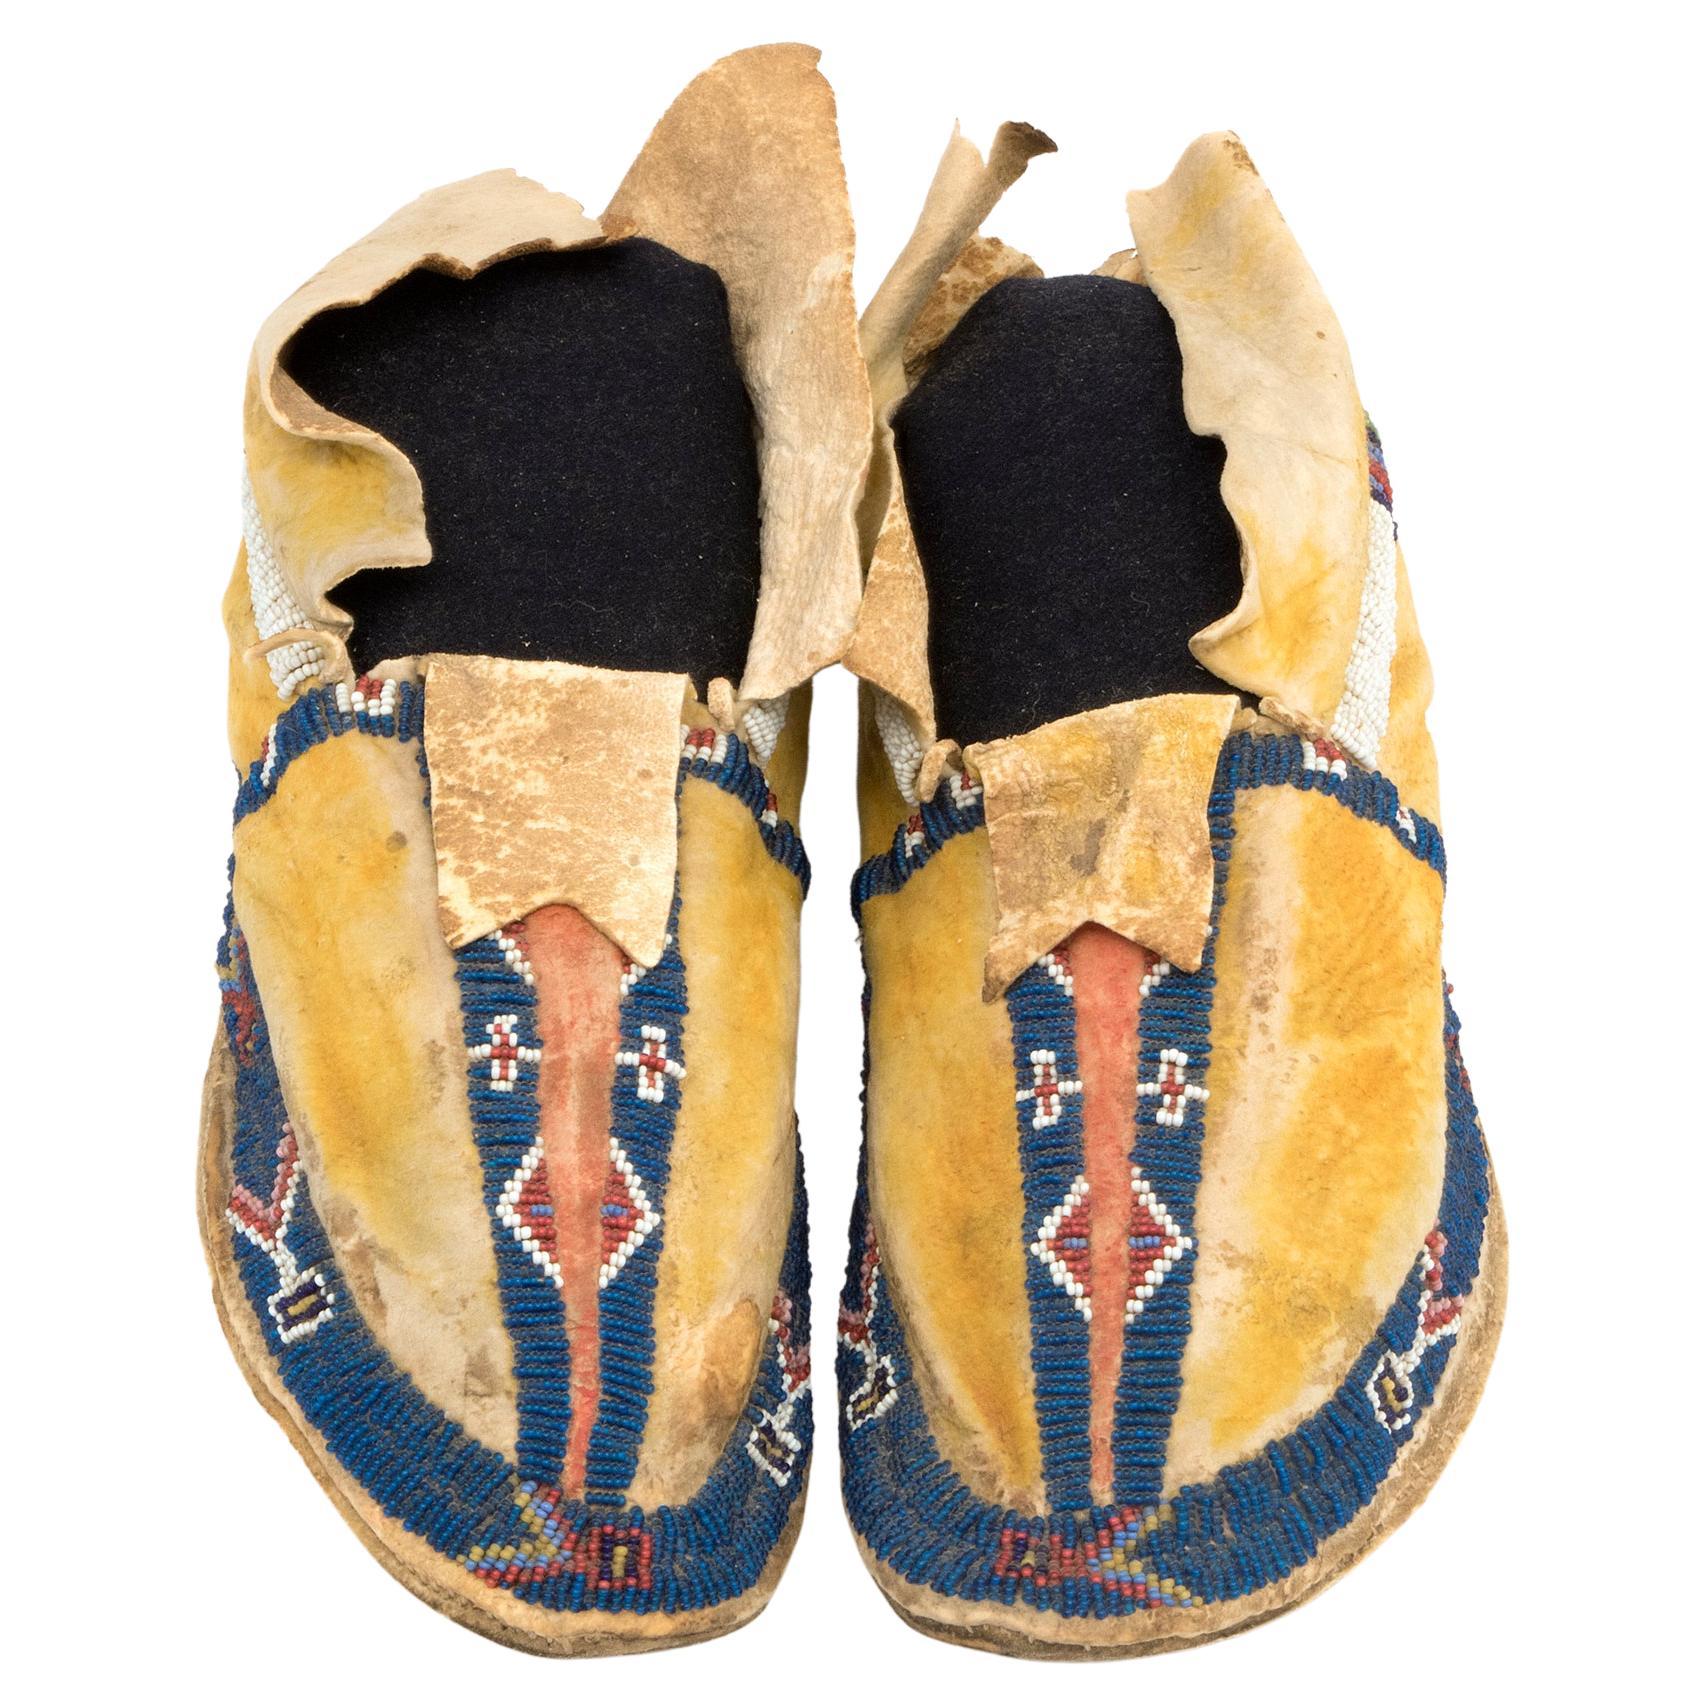 1880s Transitional Cheyenne Plains Moccasins with Dye and Beaded Elements